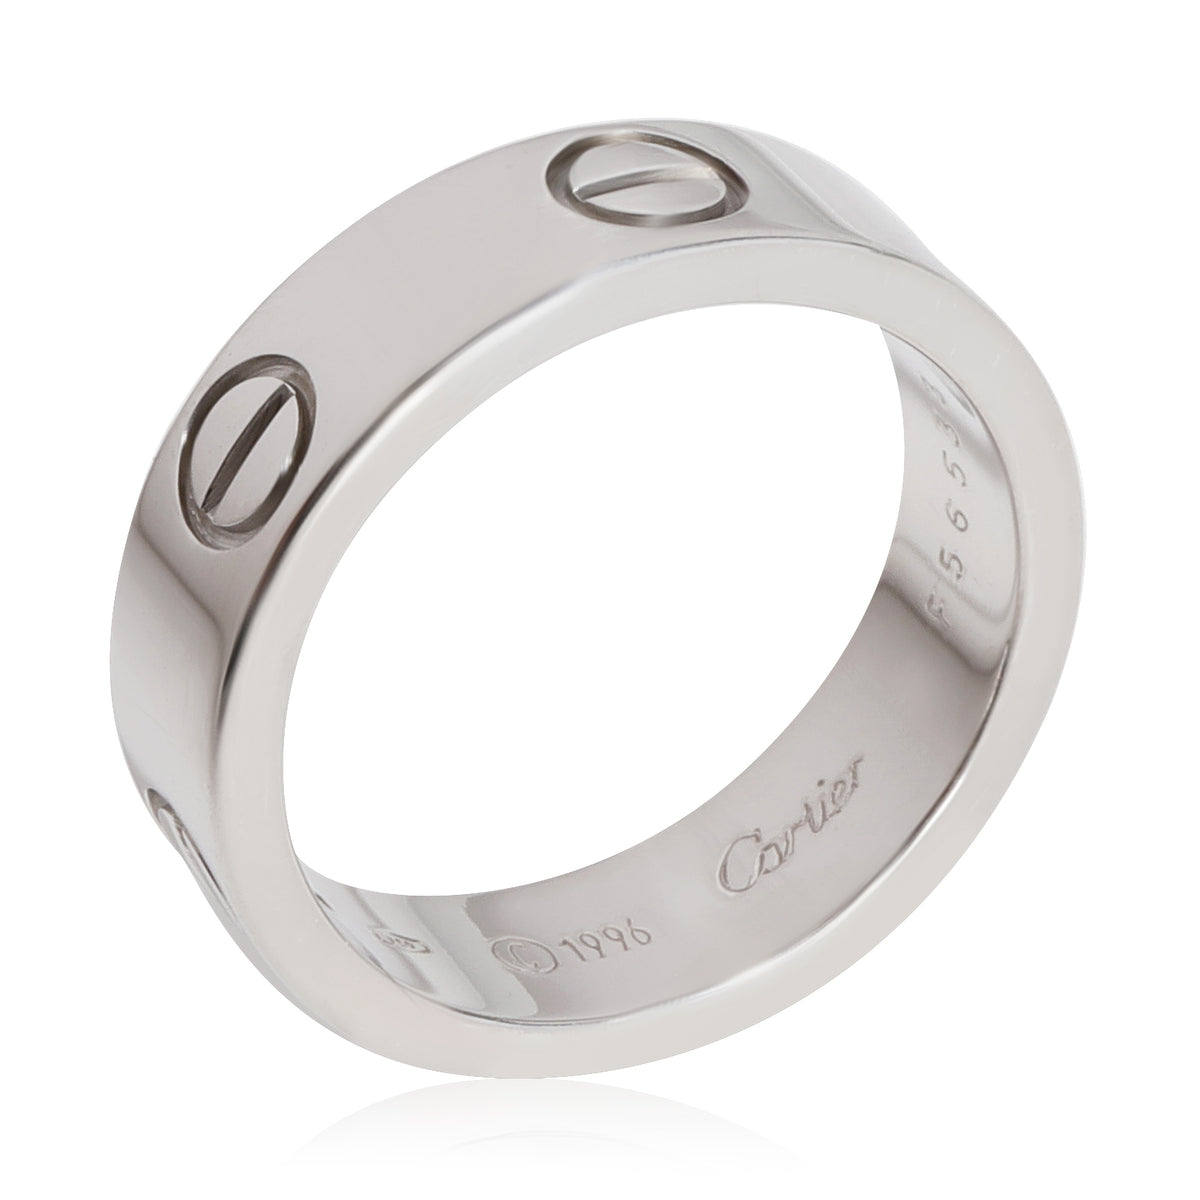 Cartier LOVE Ring in 18k White Gold